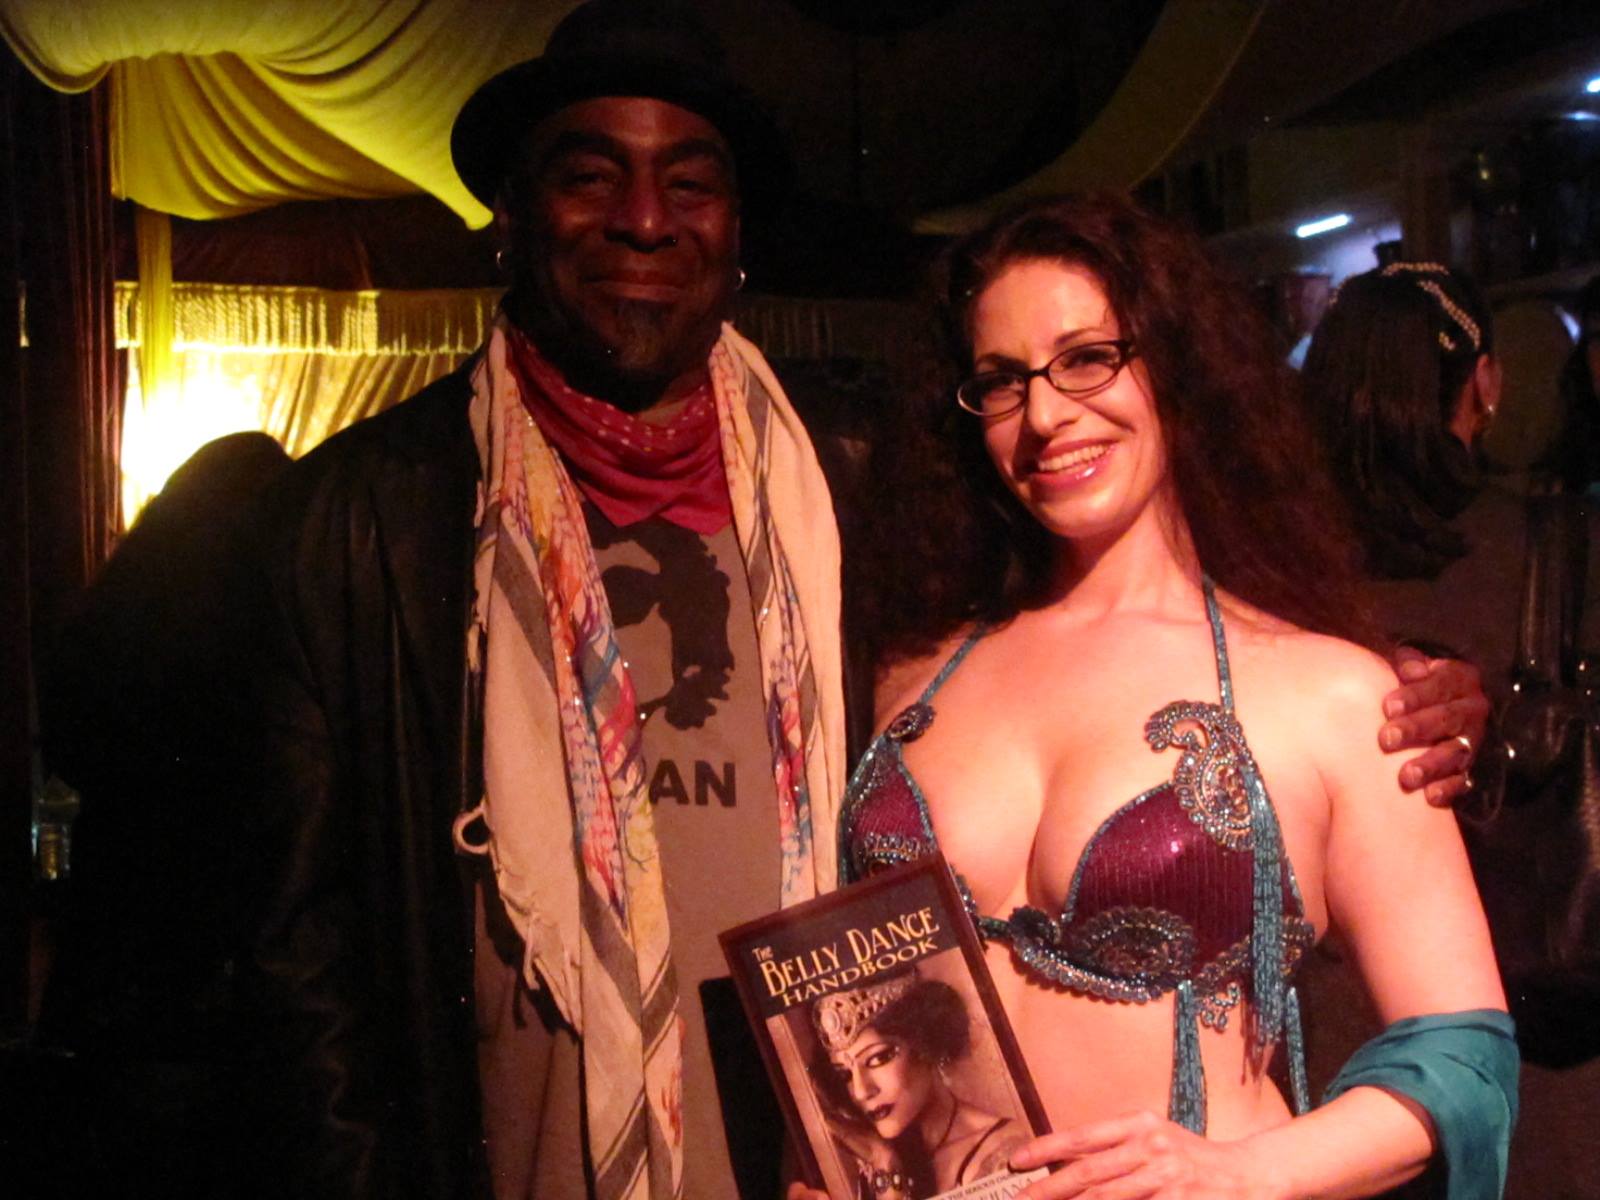 After the show with Paul Body at Pleasant Gehman's book release party/show.